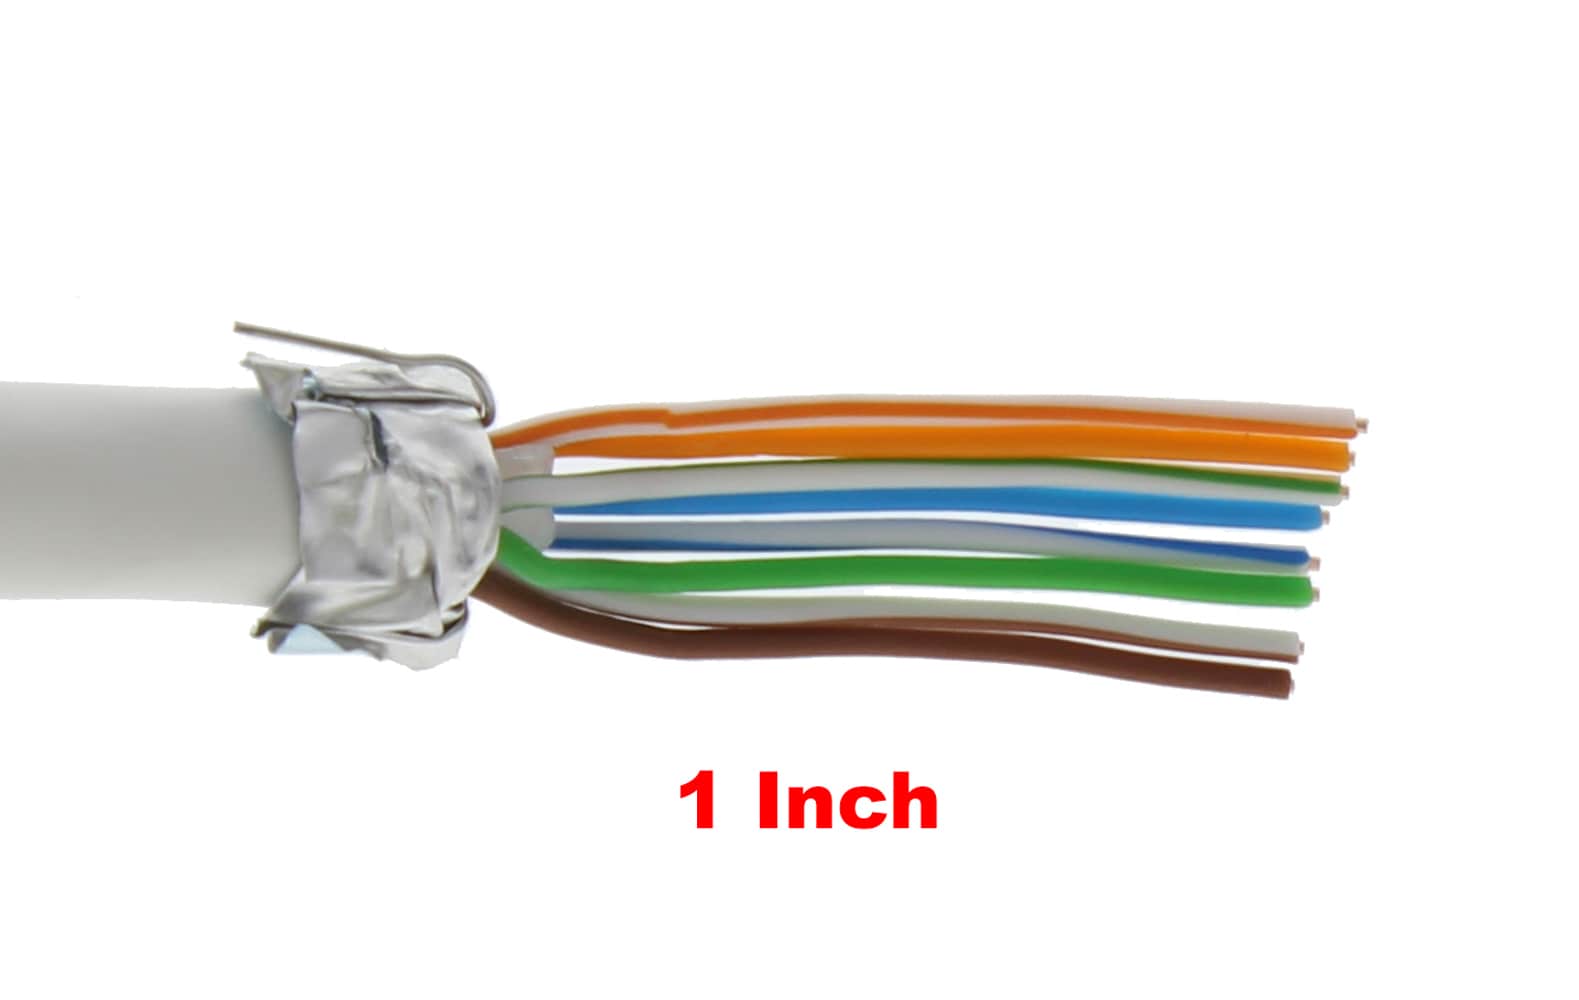 RJ45 Cat6 50 Micron Shielded Plug with Insert for Solid Wires